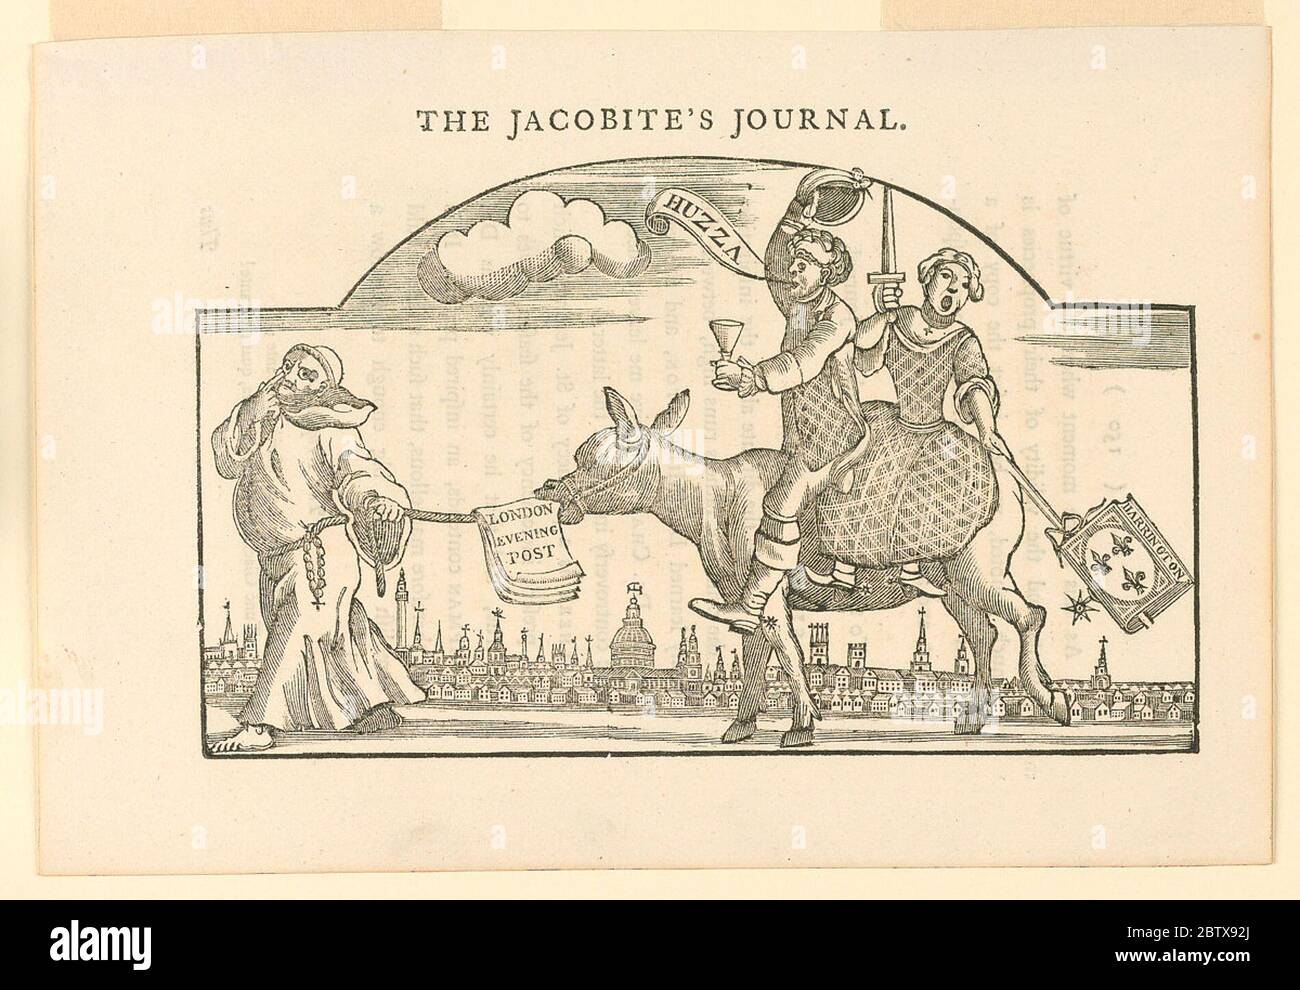 The Jacobites Journal. Research in ProgressWith an arched upper part. A donkey led by a monk carries a man and a woman. The man holds a wine glass in his left hand, raises his hat with his right hand and shouts 'Huzza'; the woman holds a sword and a pack of cards marked 'Harrington'. Stock Photo